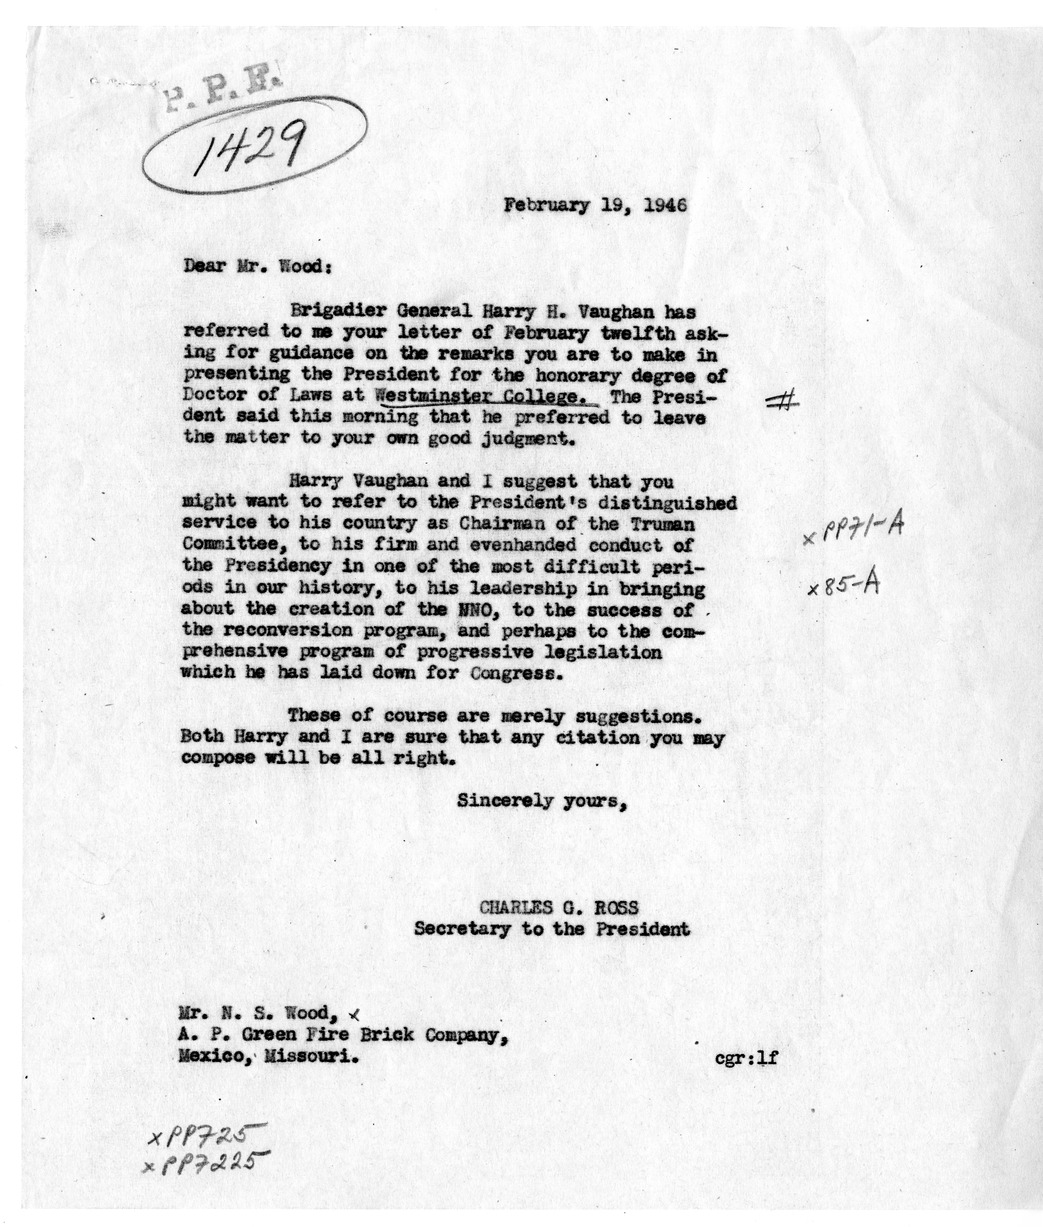 Letter from N.S. Wood to Brigadier General Harry H. Vaughan with Reply from Charles G. Ross